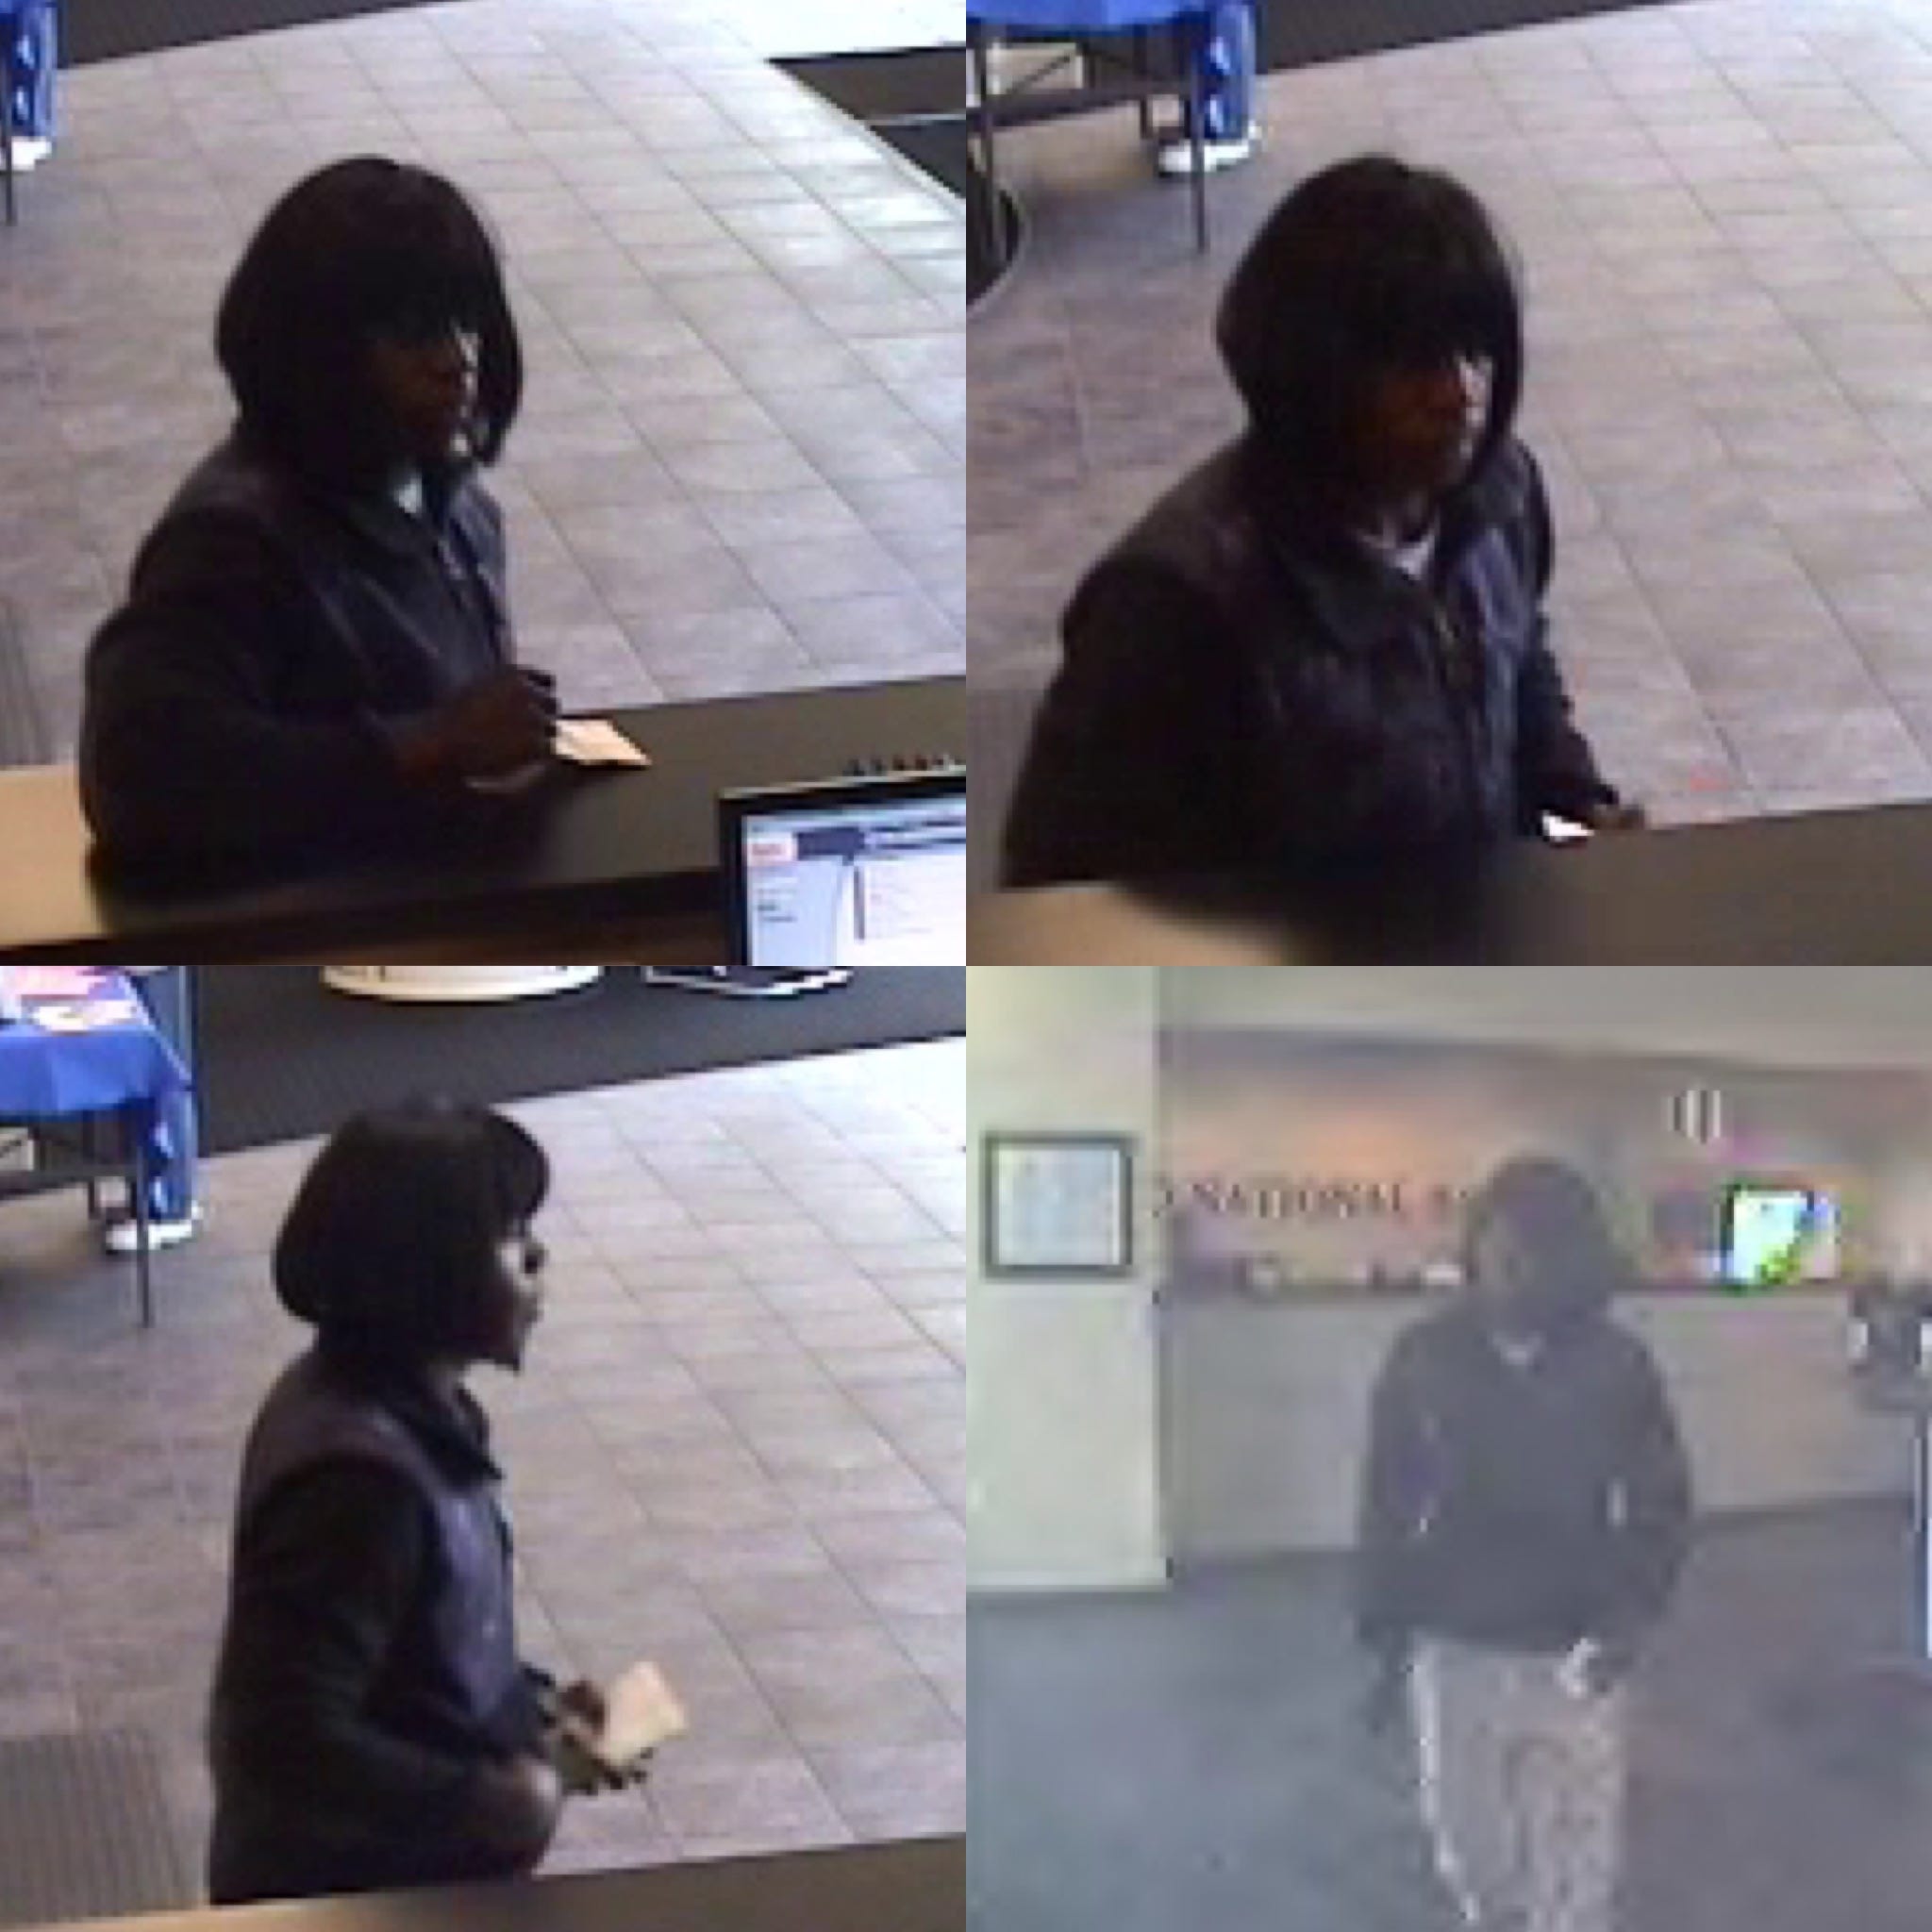 Man in woman's wig robs bank in Lawrence